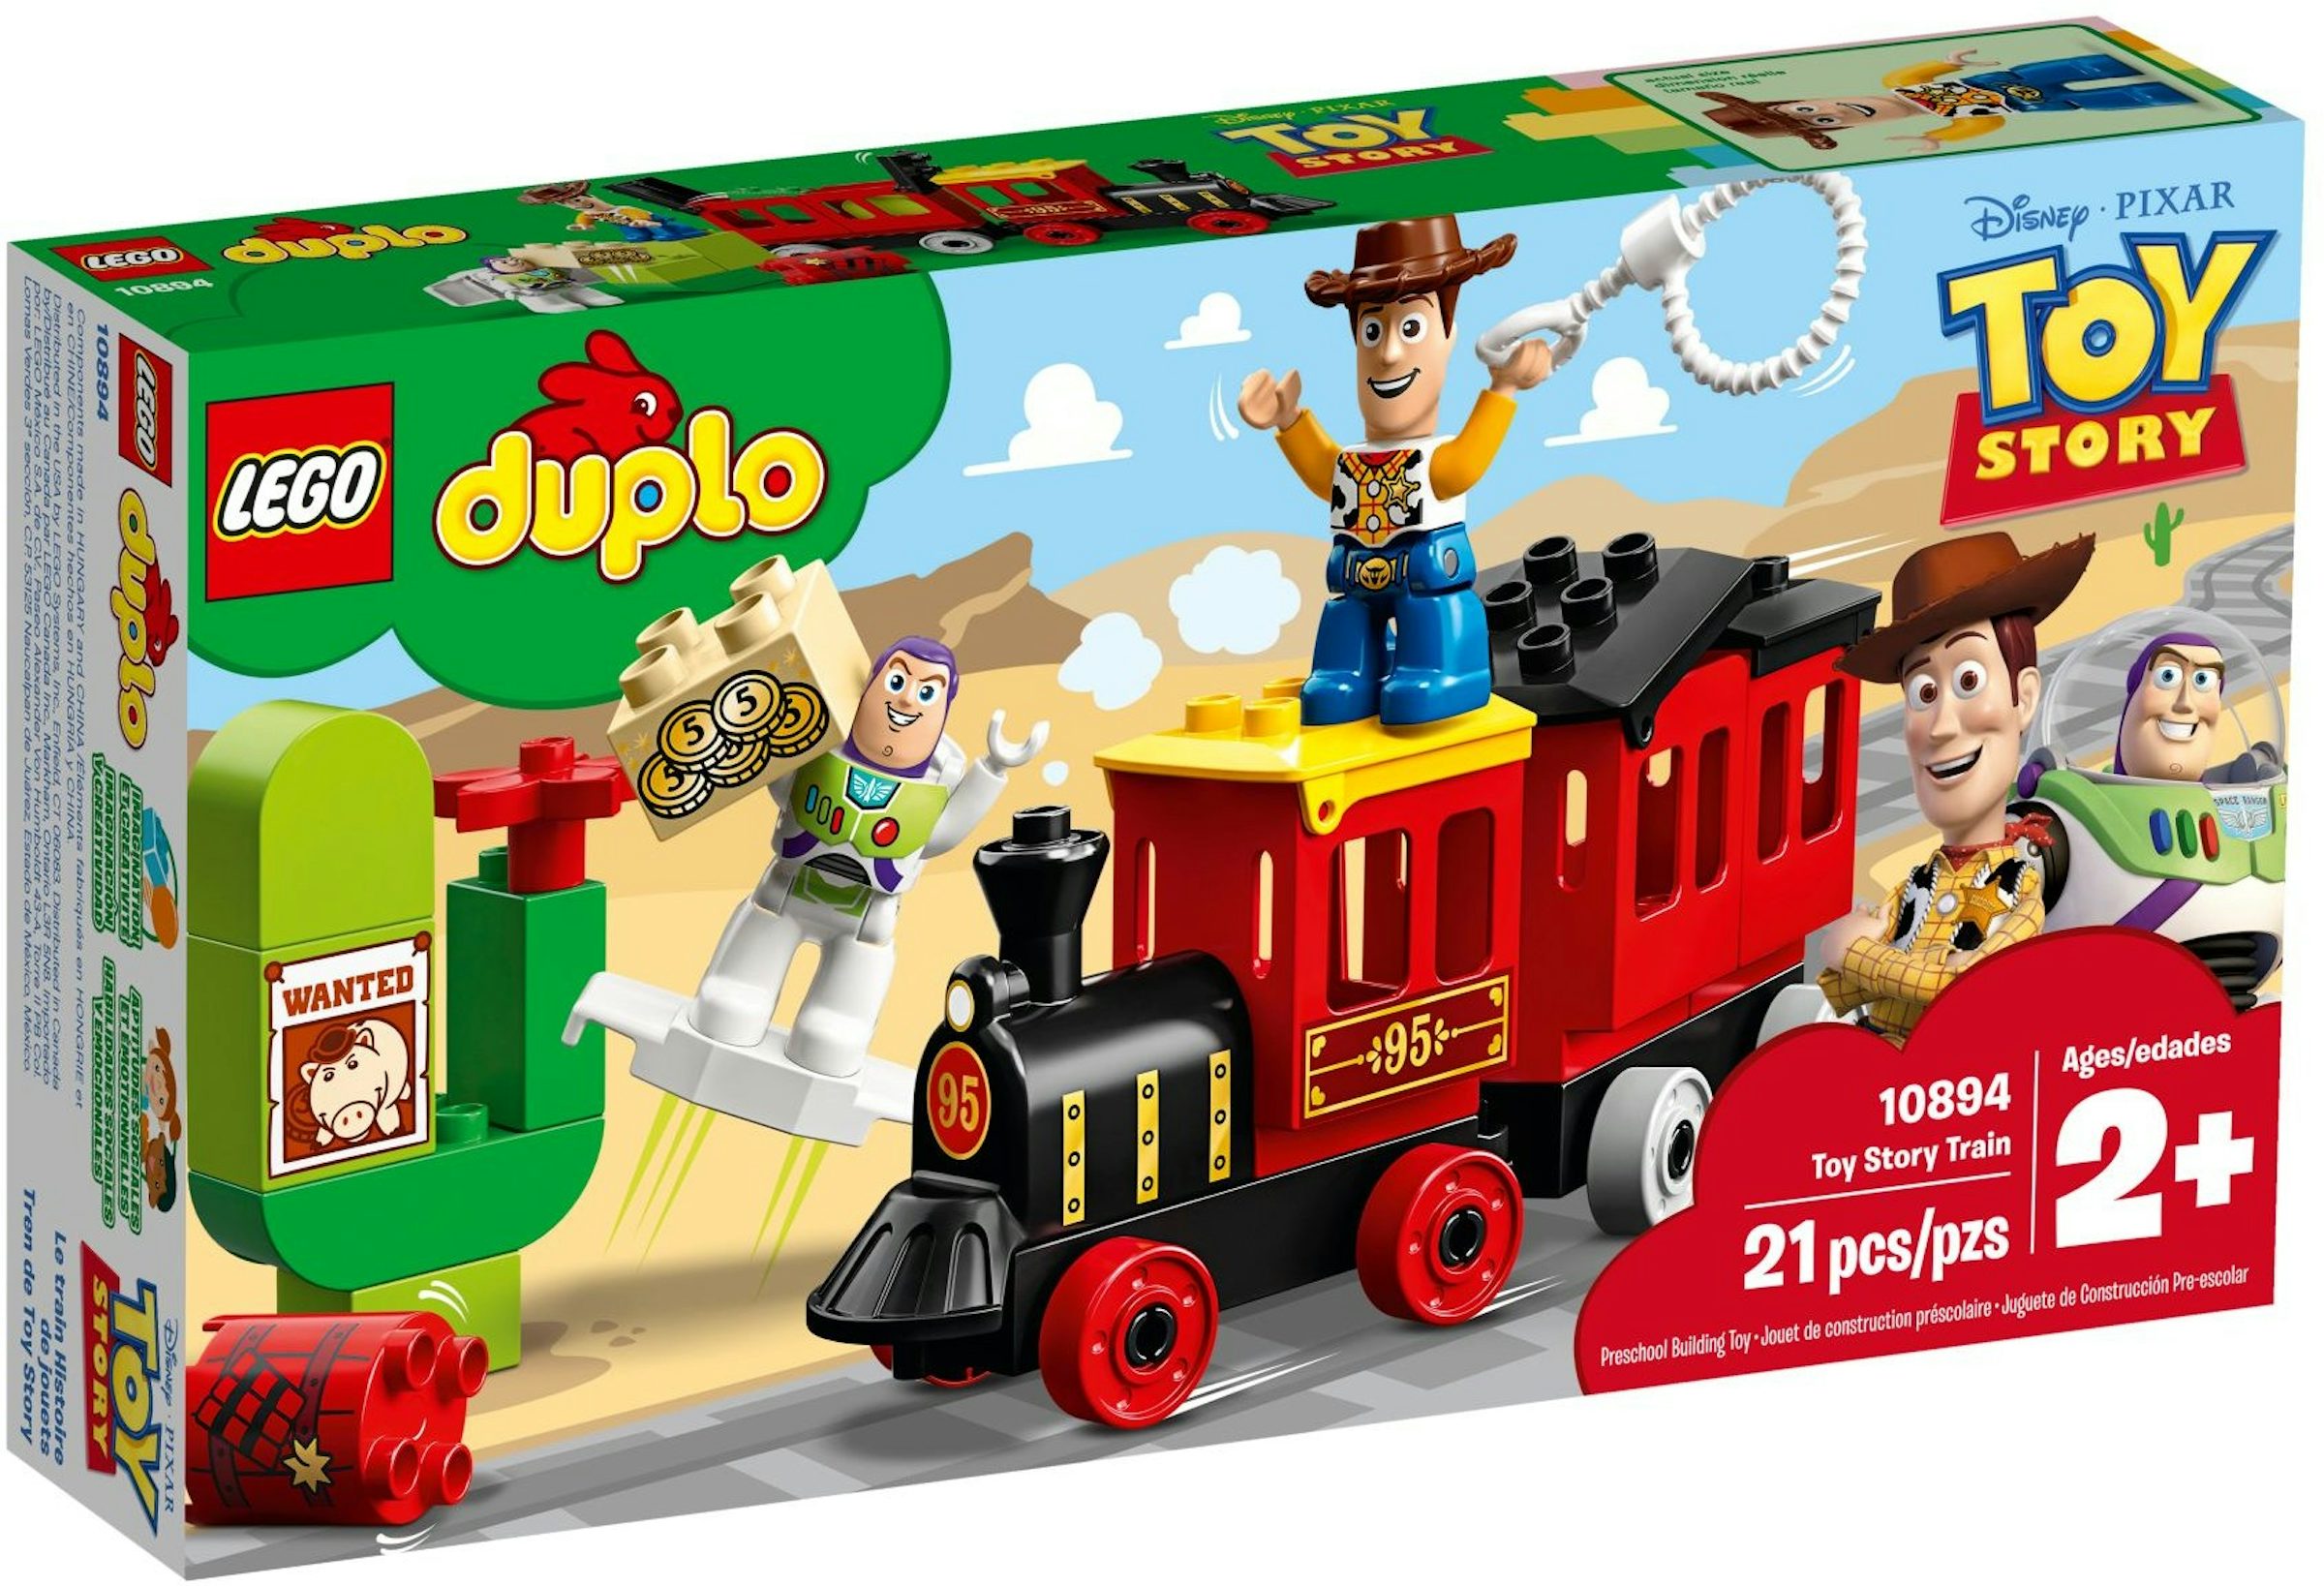 Not sure if lego duplo qualifies as lego, but I build a train